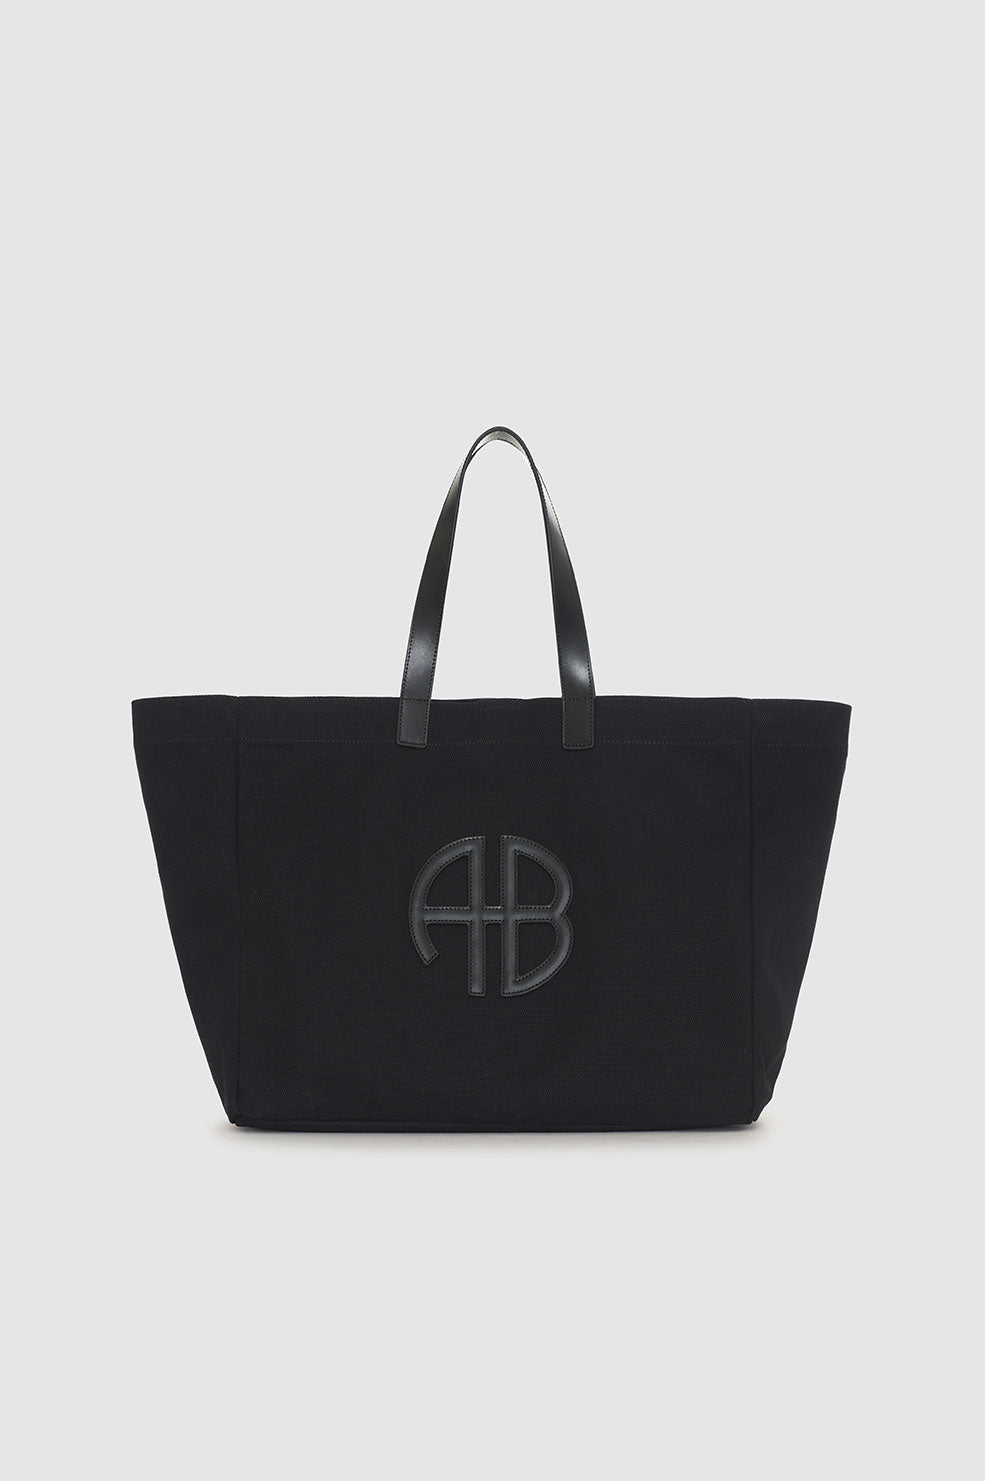 ANINE BING Large Canvas Rio Tote - Black - Front View